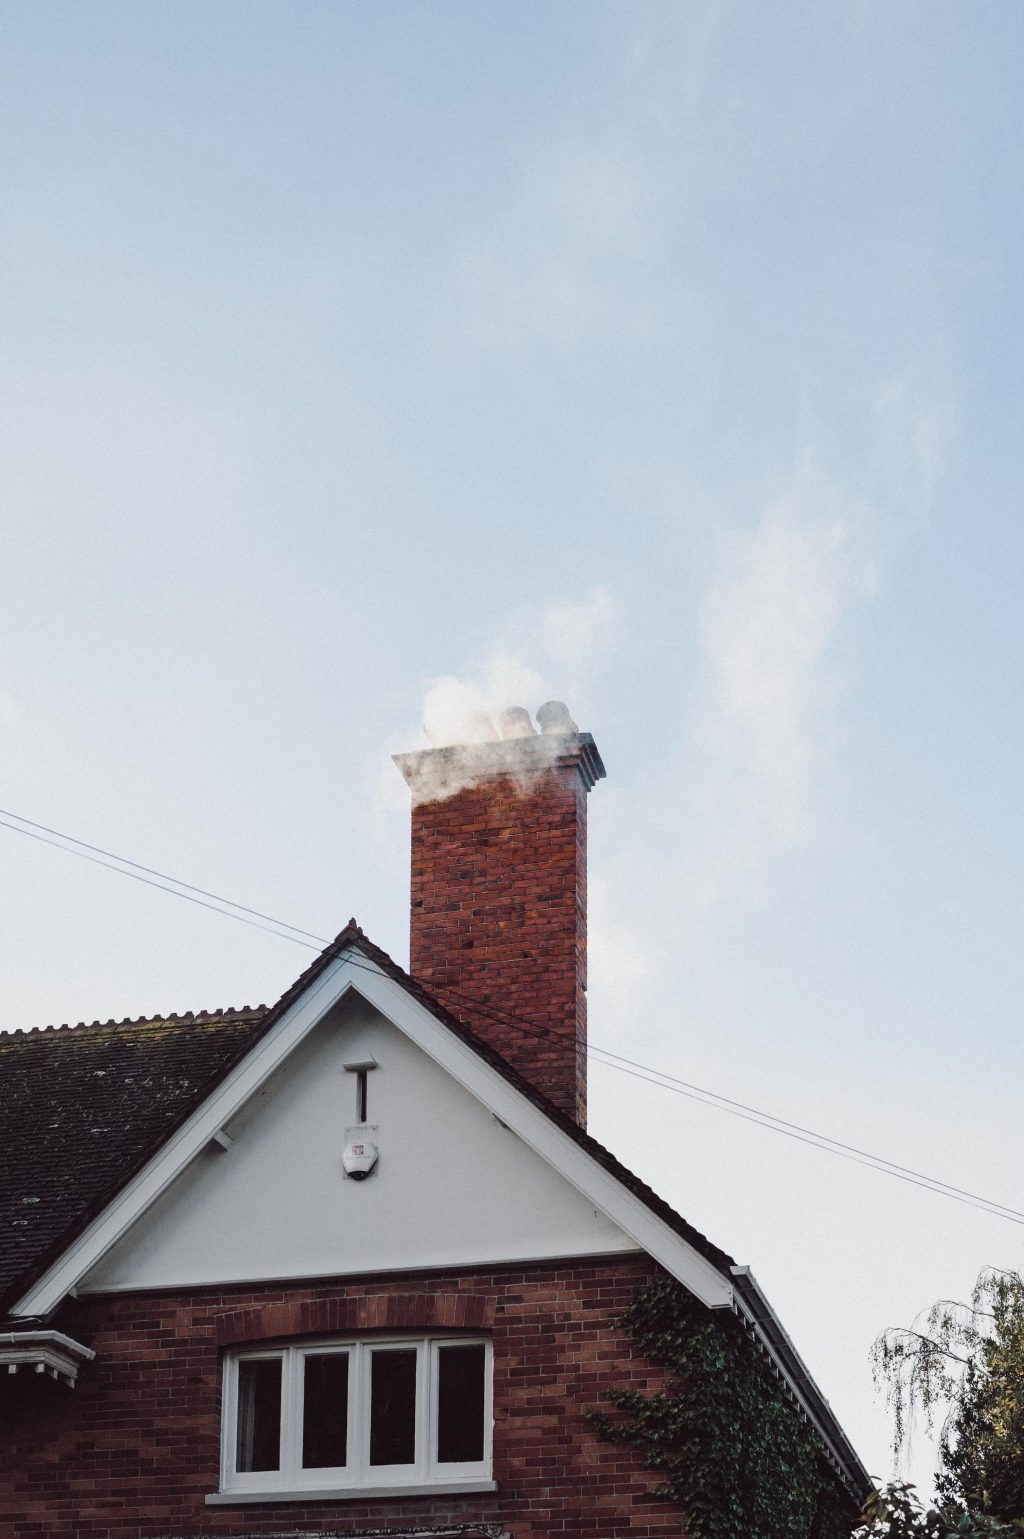 A brick house with a chimney.